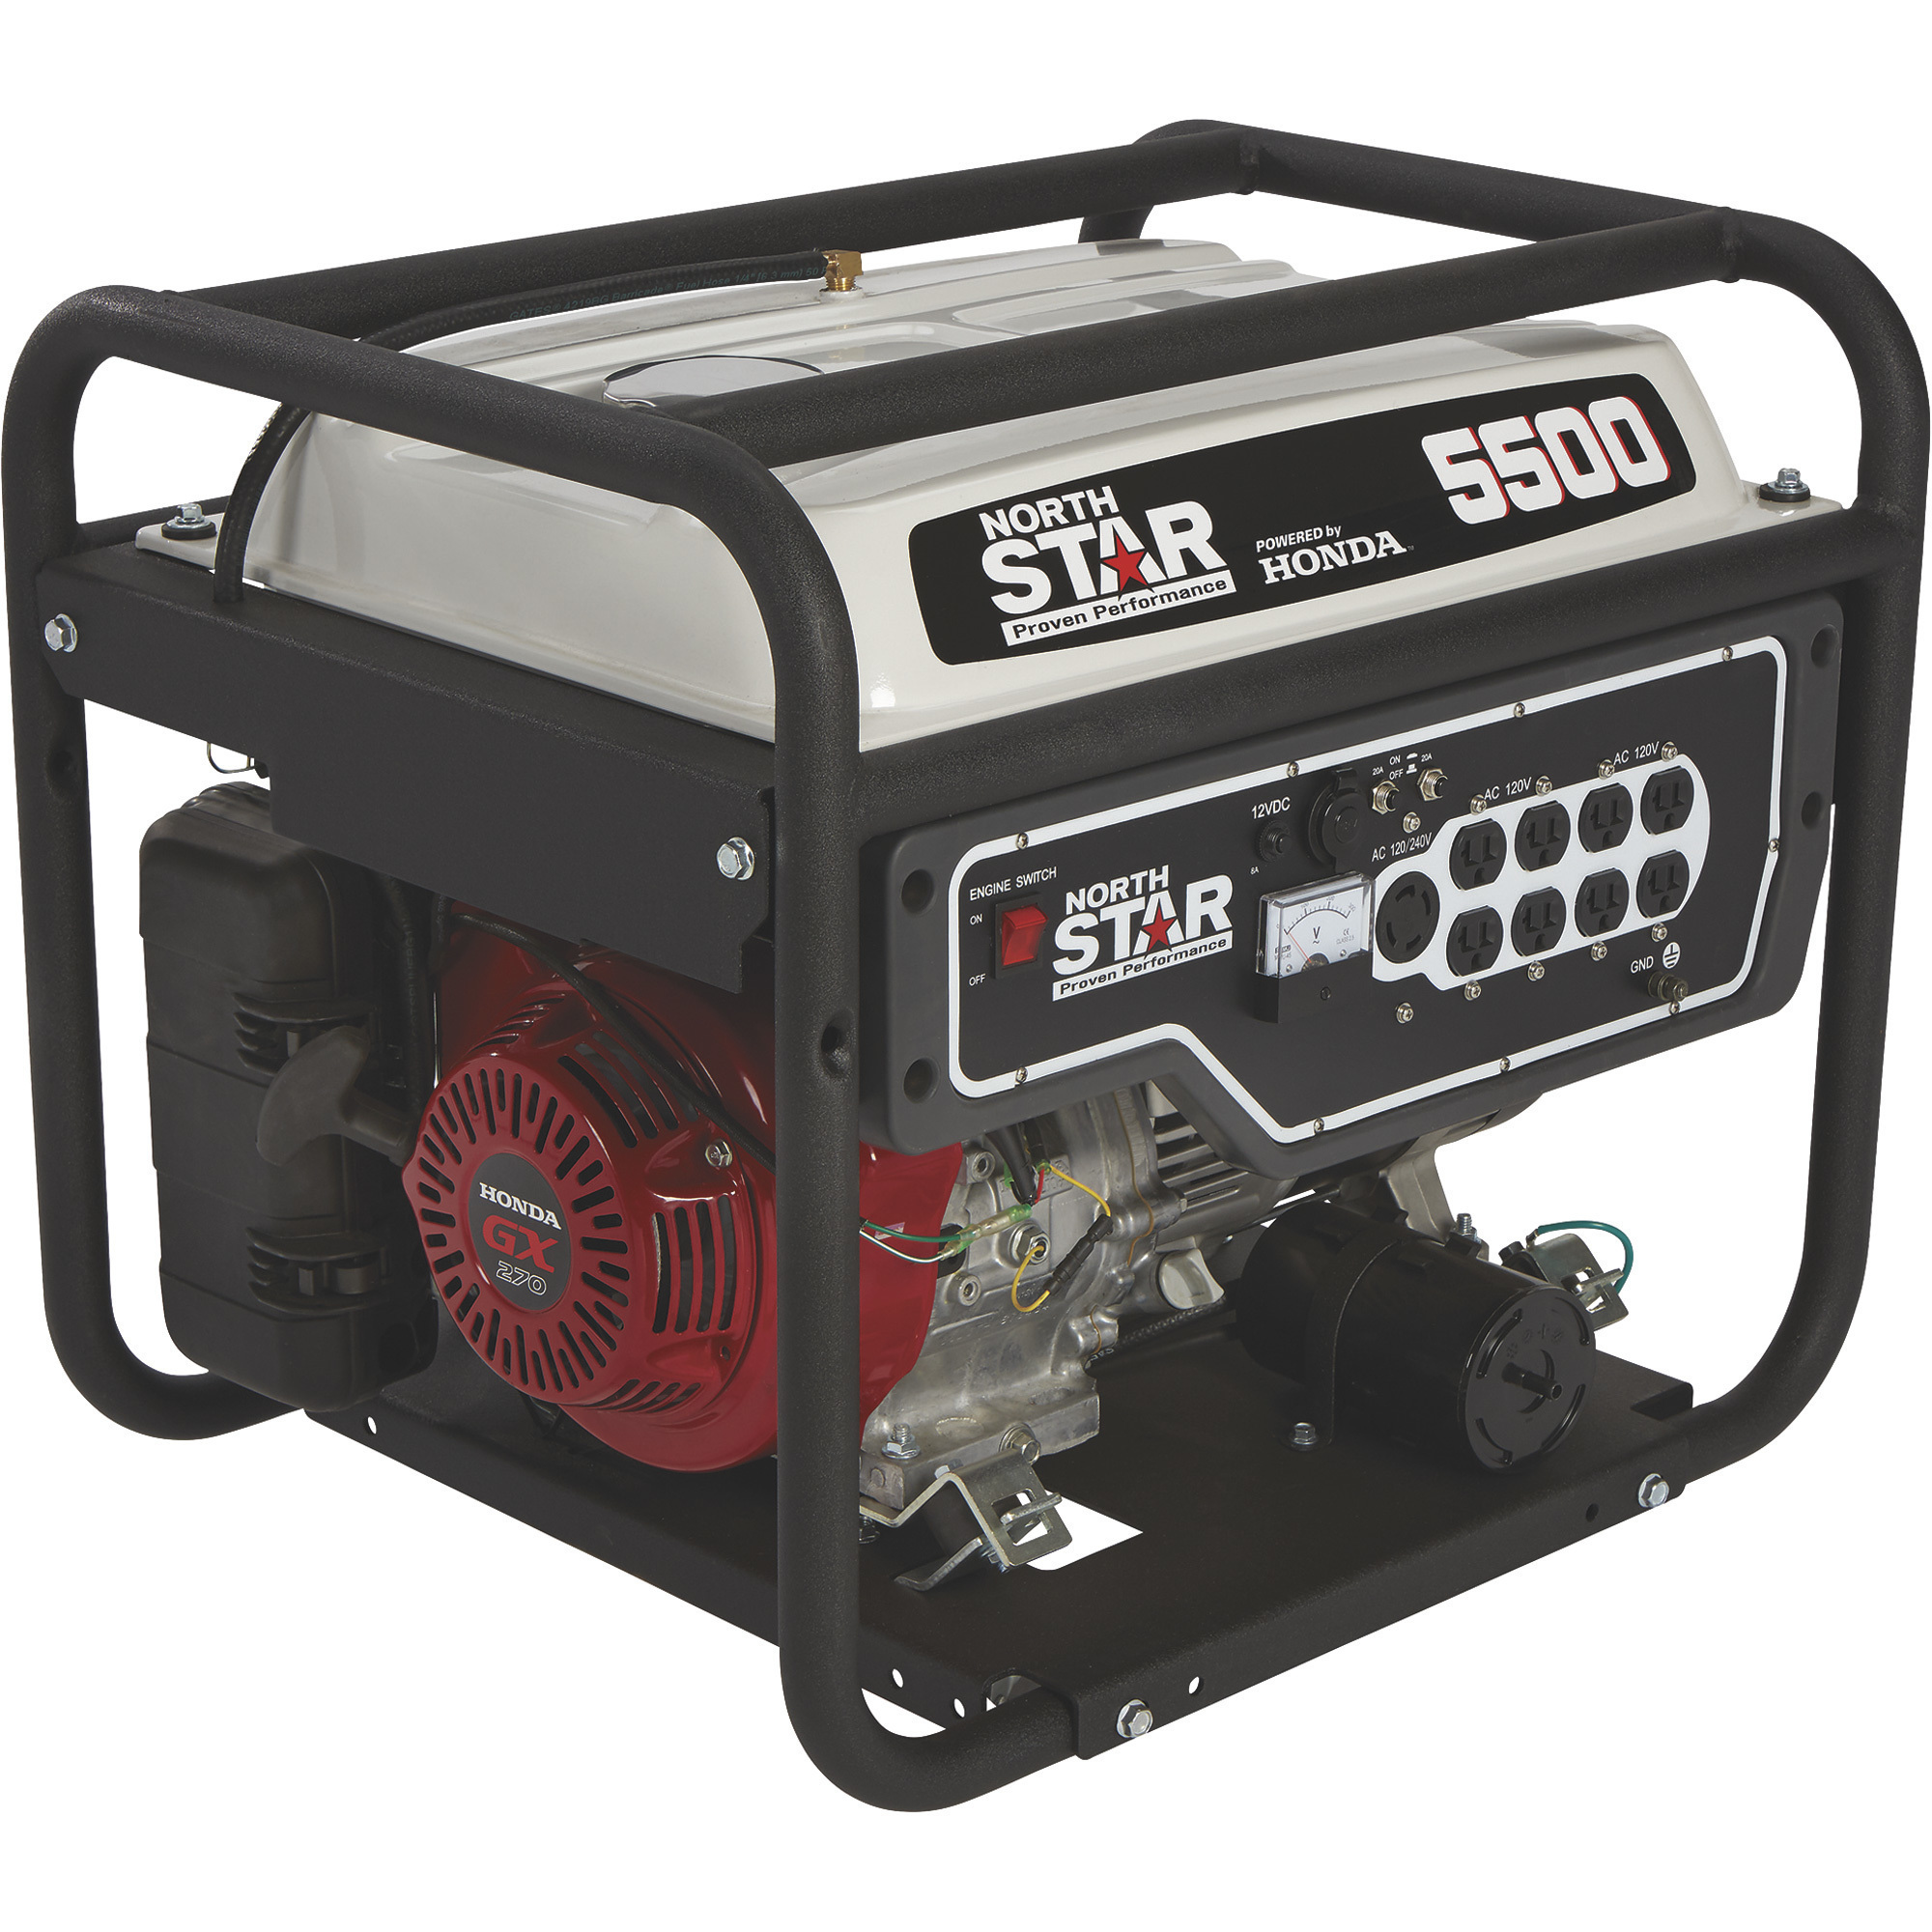 NorthStar Portable with Honda GX270 Engine — 5500 Surge 4500 Rated Watts, Compliant | Northern